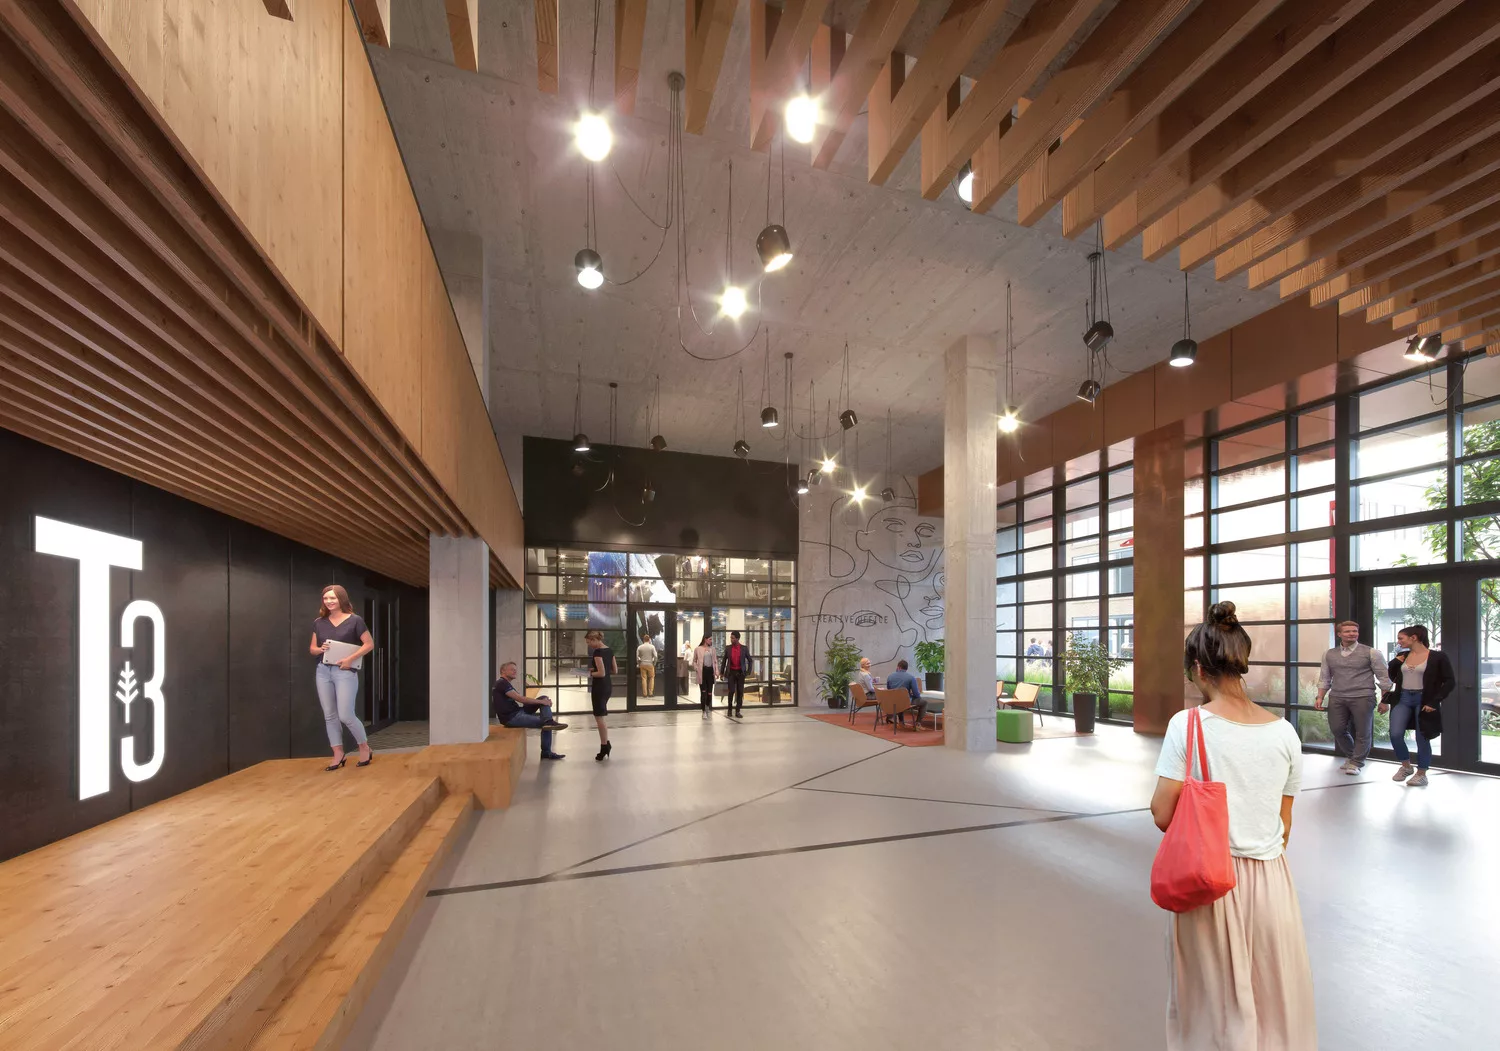 Interior daylight rendering of the lobby inside a seven-story, heavy-timber office building at The Finery